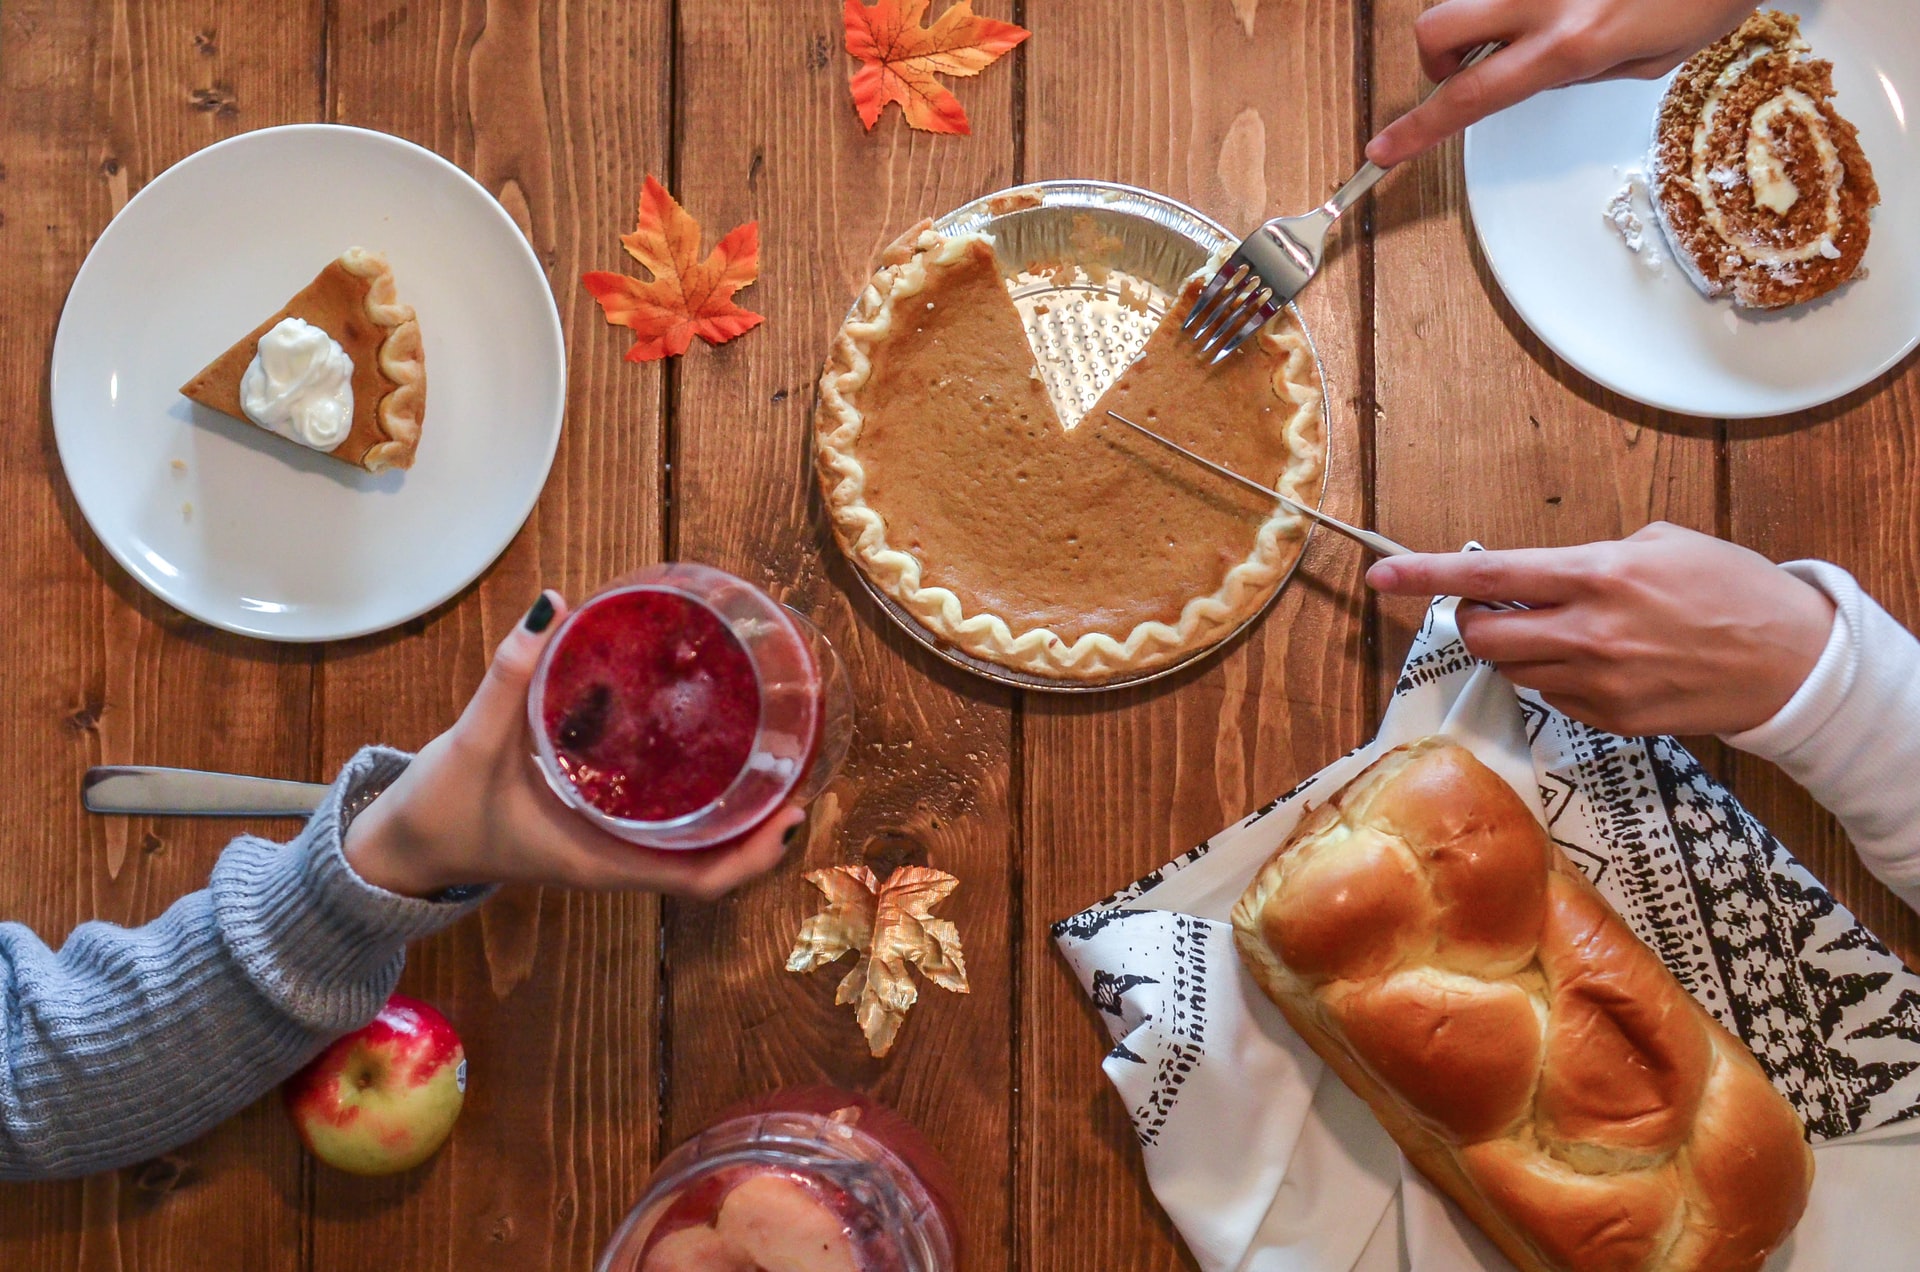 Healthy Holiday Foods and Fun: Make Smart Choices as You Celebrate the Season